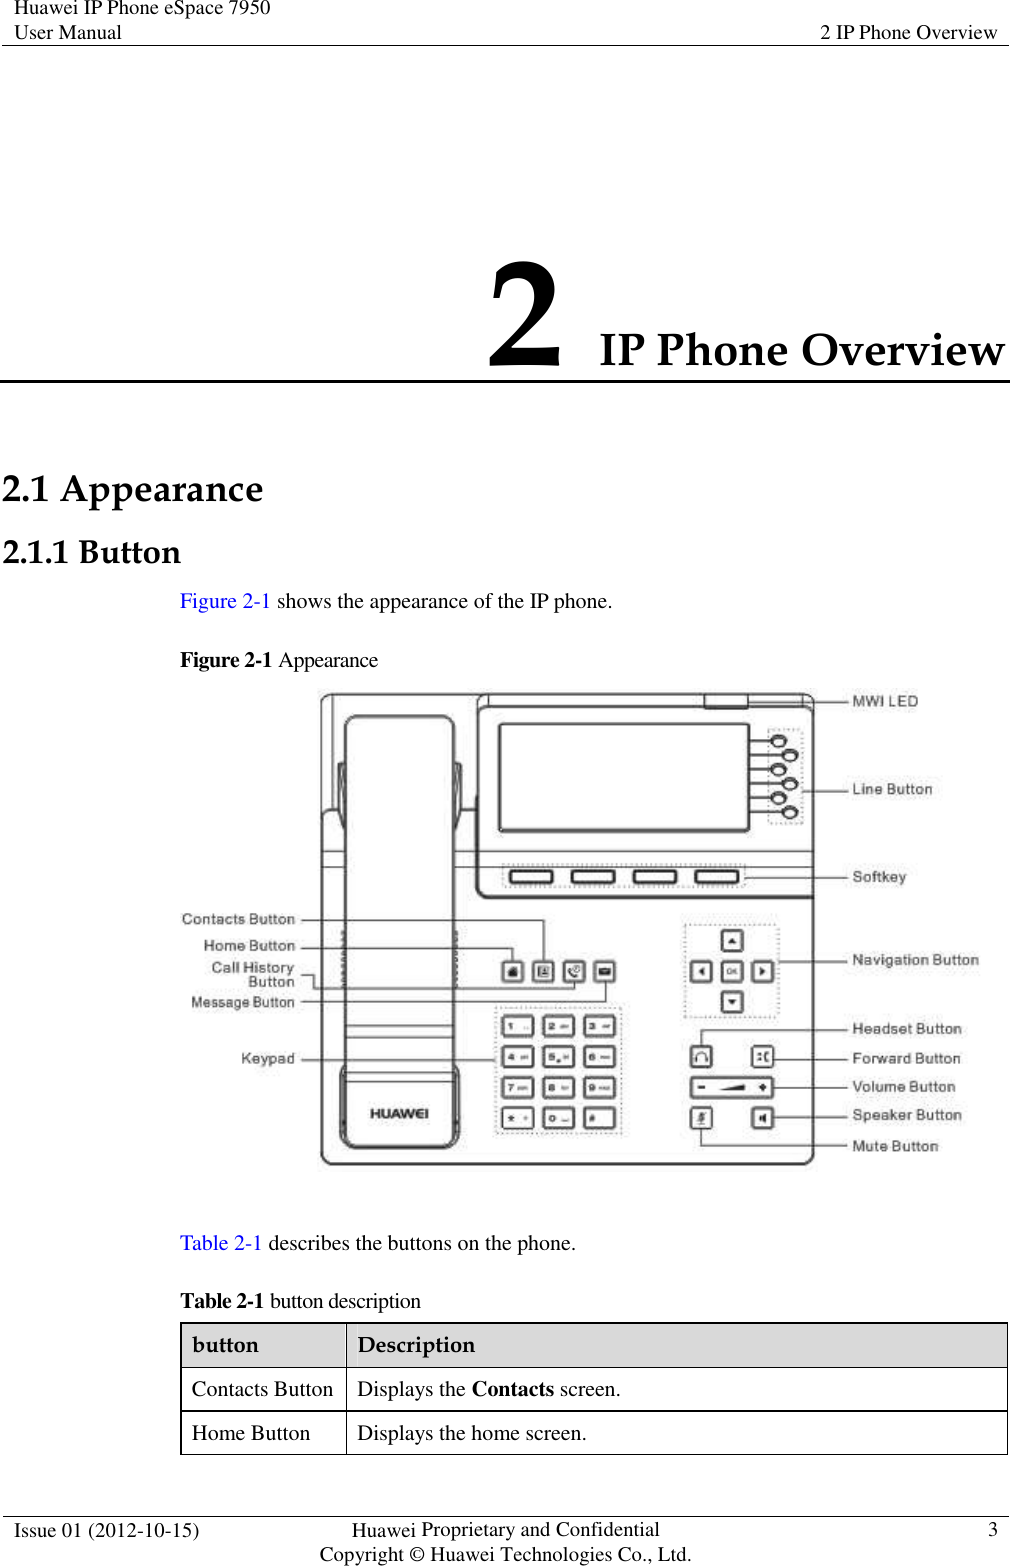 Huawei IP Phone eSpace 7950 User Manual  2 IP Phone Overview  Issue 01 (2012-10-15)  Huawei Proprietary and Confidential                                     Copyright © Huawei Technologies Co., Ltd.  3  2 IP Phone Overview 2.1 Appearance 2.1.1 Button Figure 2-1 shows the appearance of the IP phone. Figure 2-1 Appearance   Table 2-1 describes the buttons on the phone. Table 2-1 button description button  Description Contacts Button  Displays the Contacts screen. Home Button  Displays the home screen. 